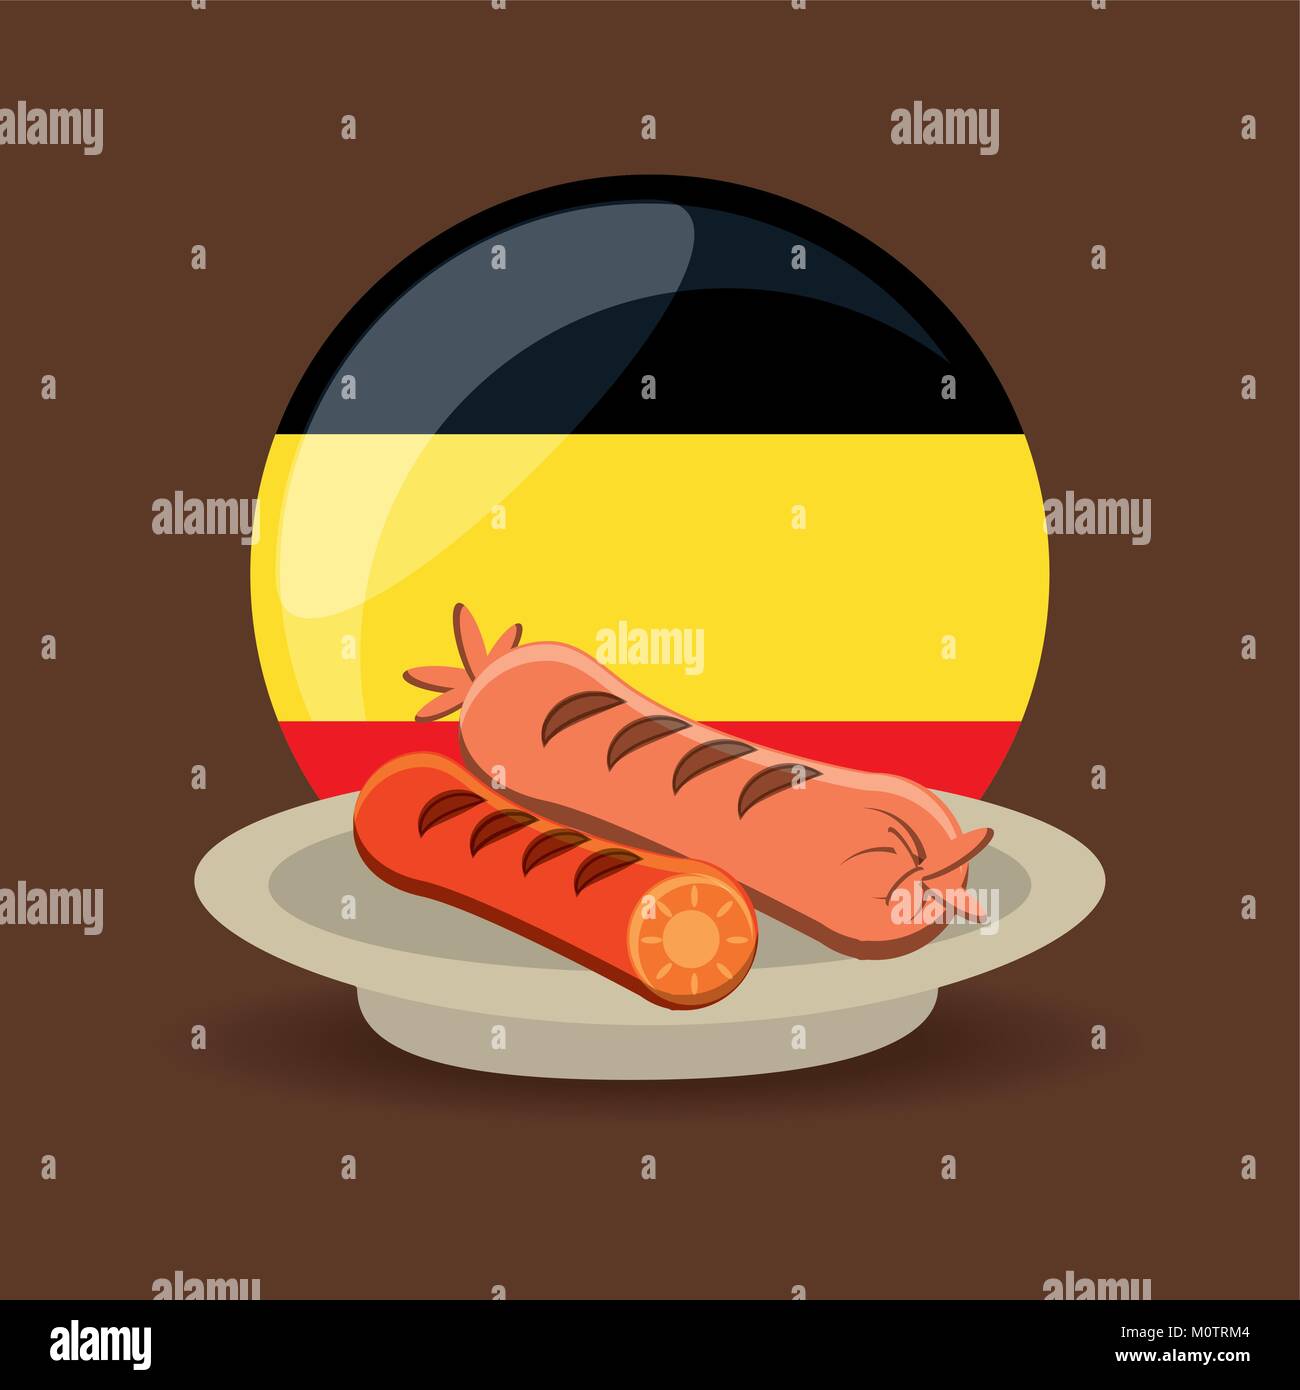 germany design concept Stock Vector